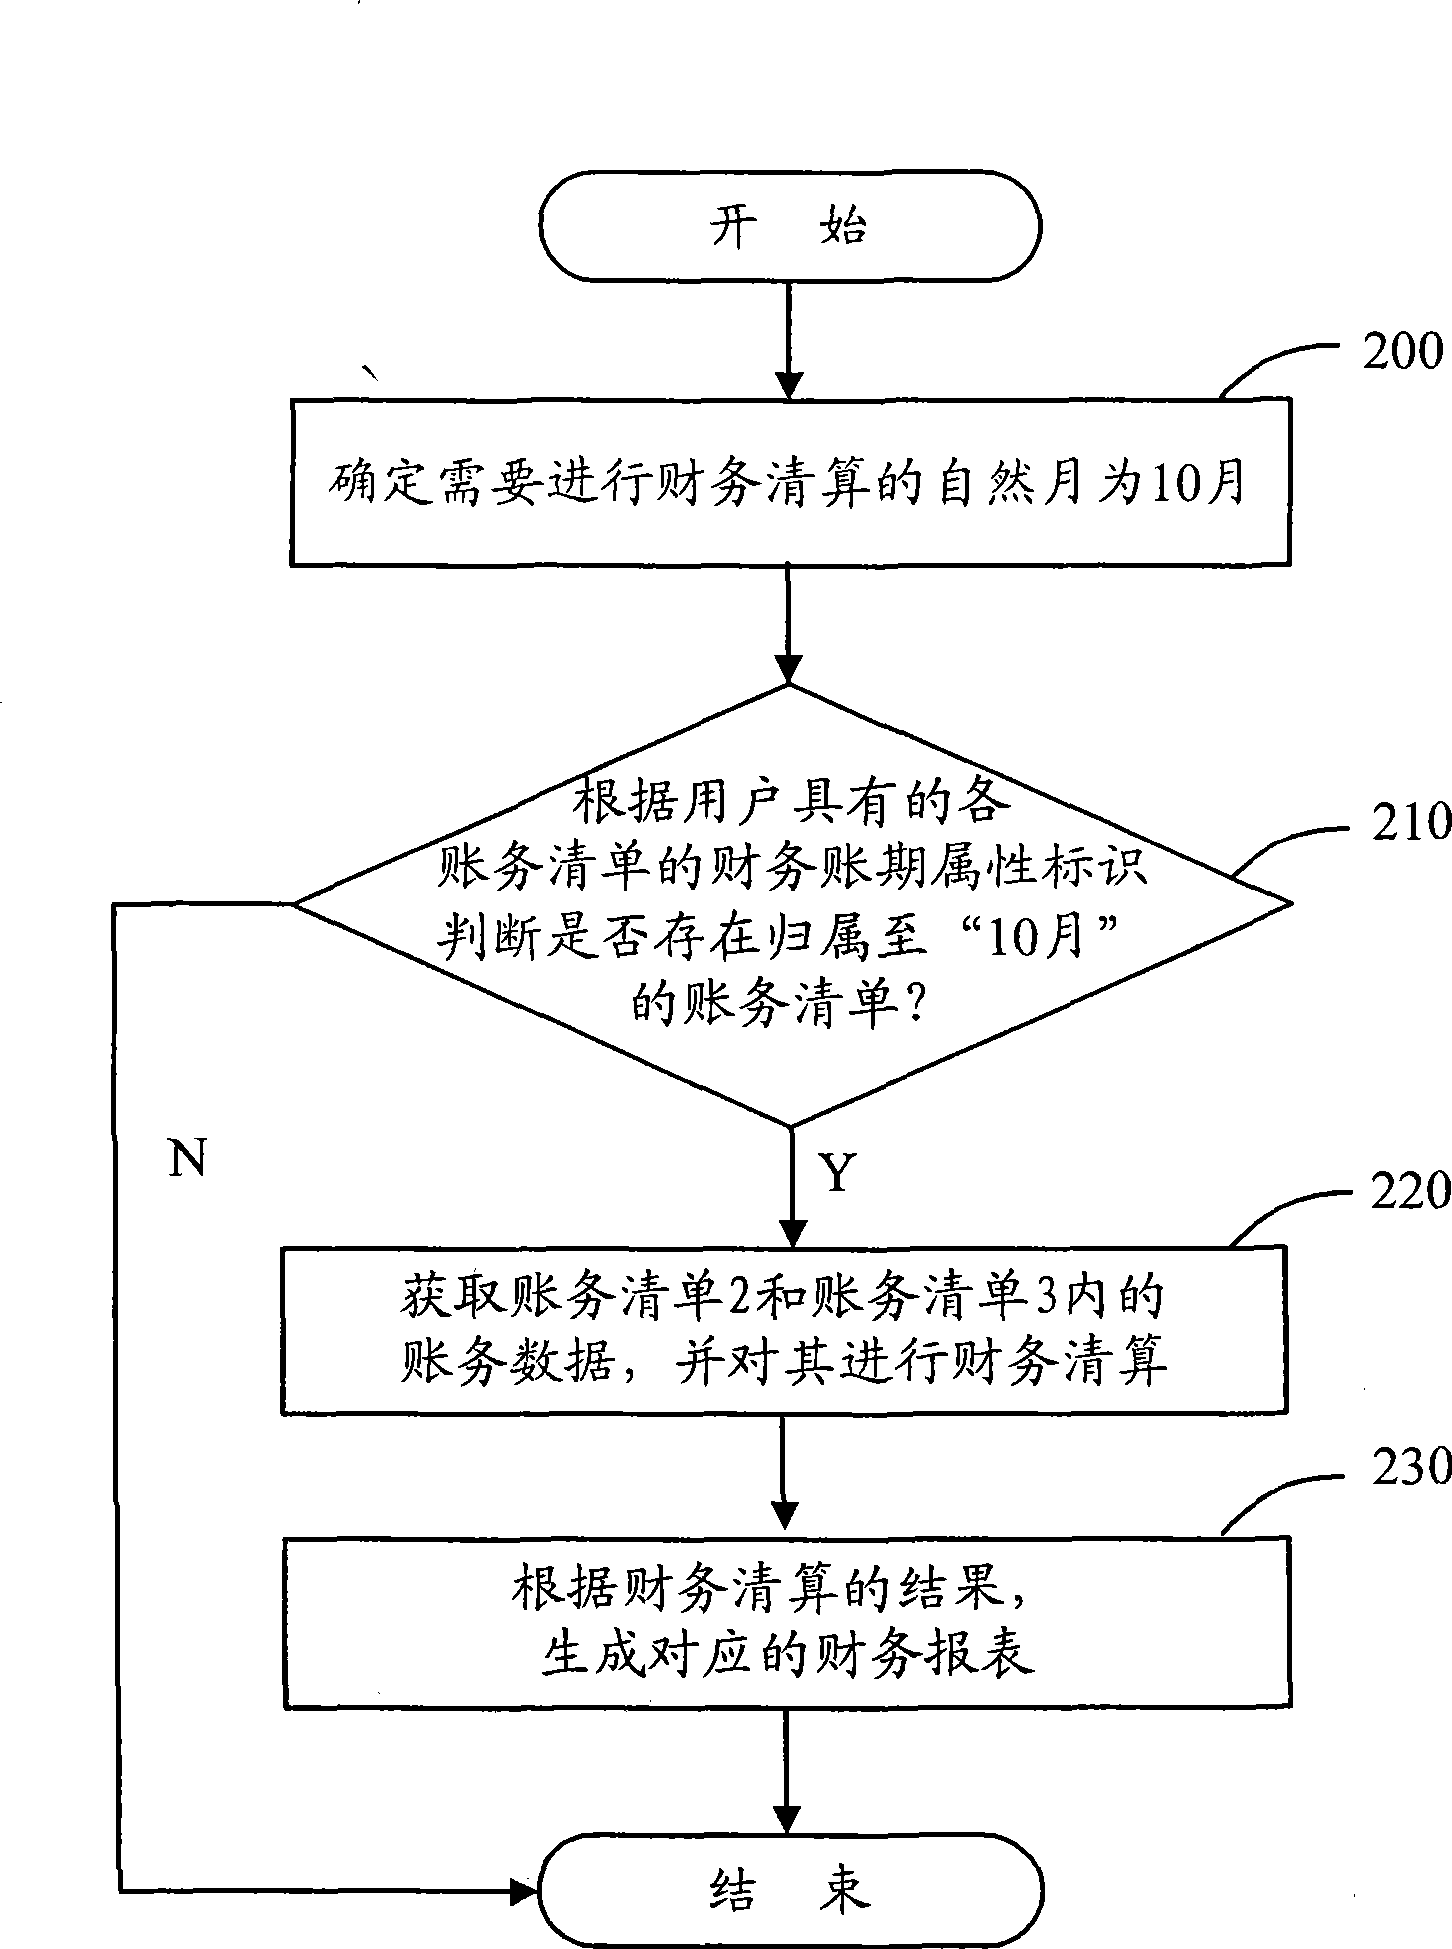 Method and apparatus for financial report generation